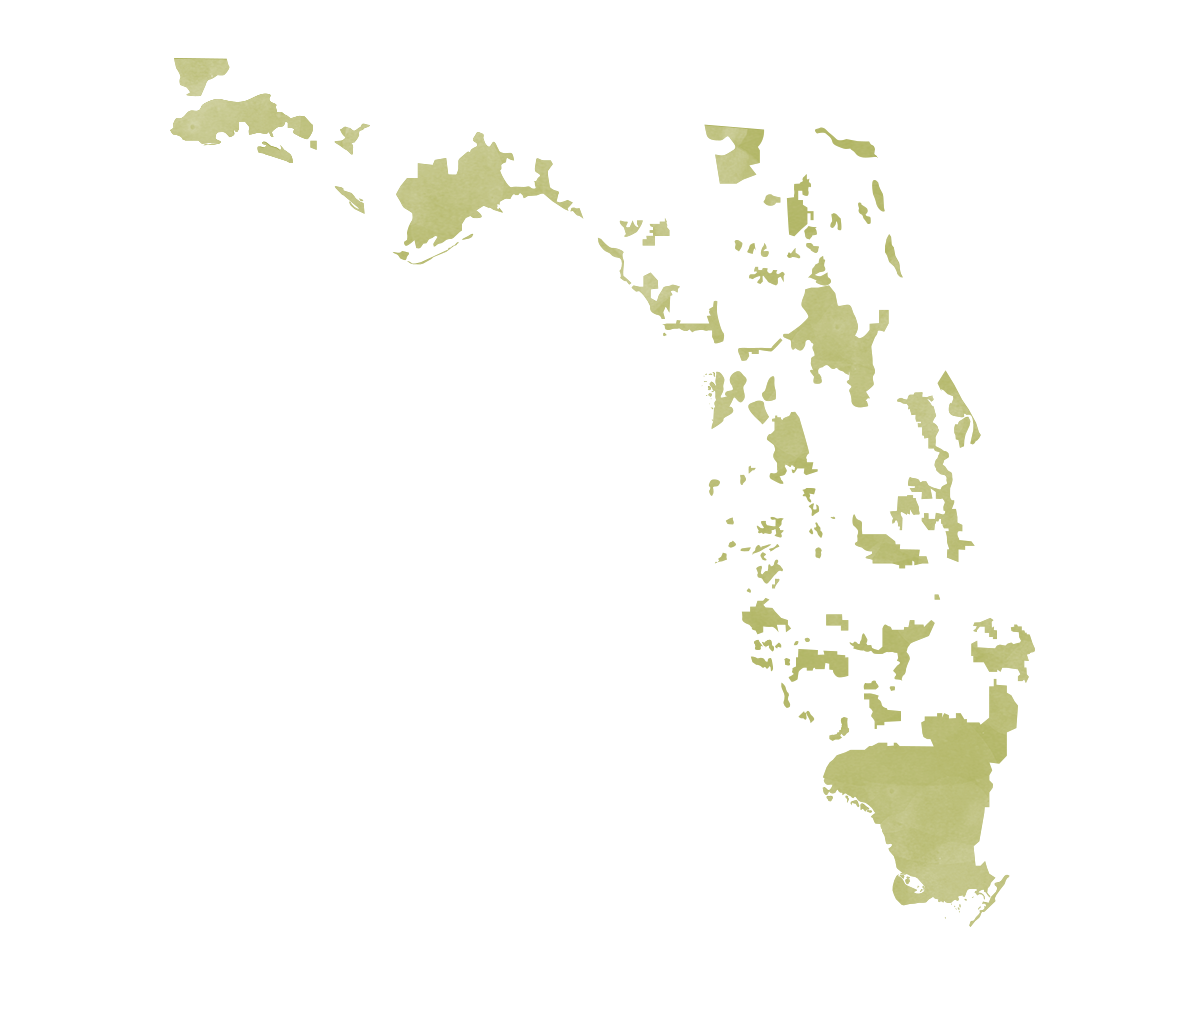 Florida map displaying current conservation areas